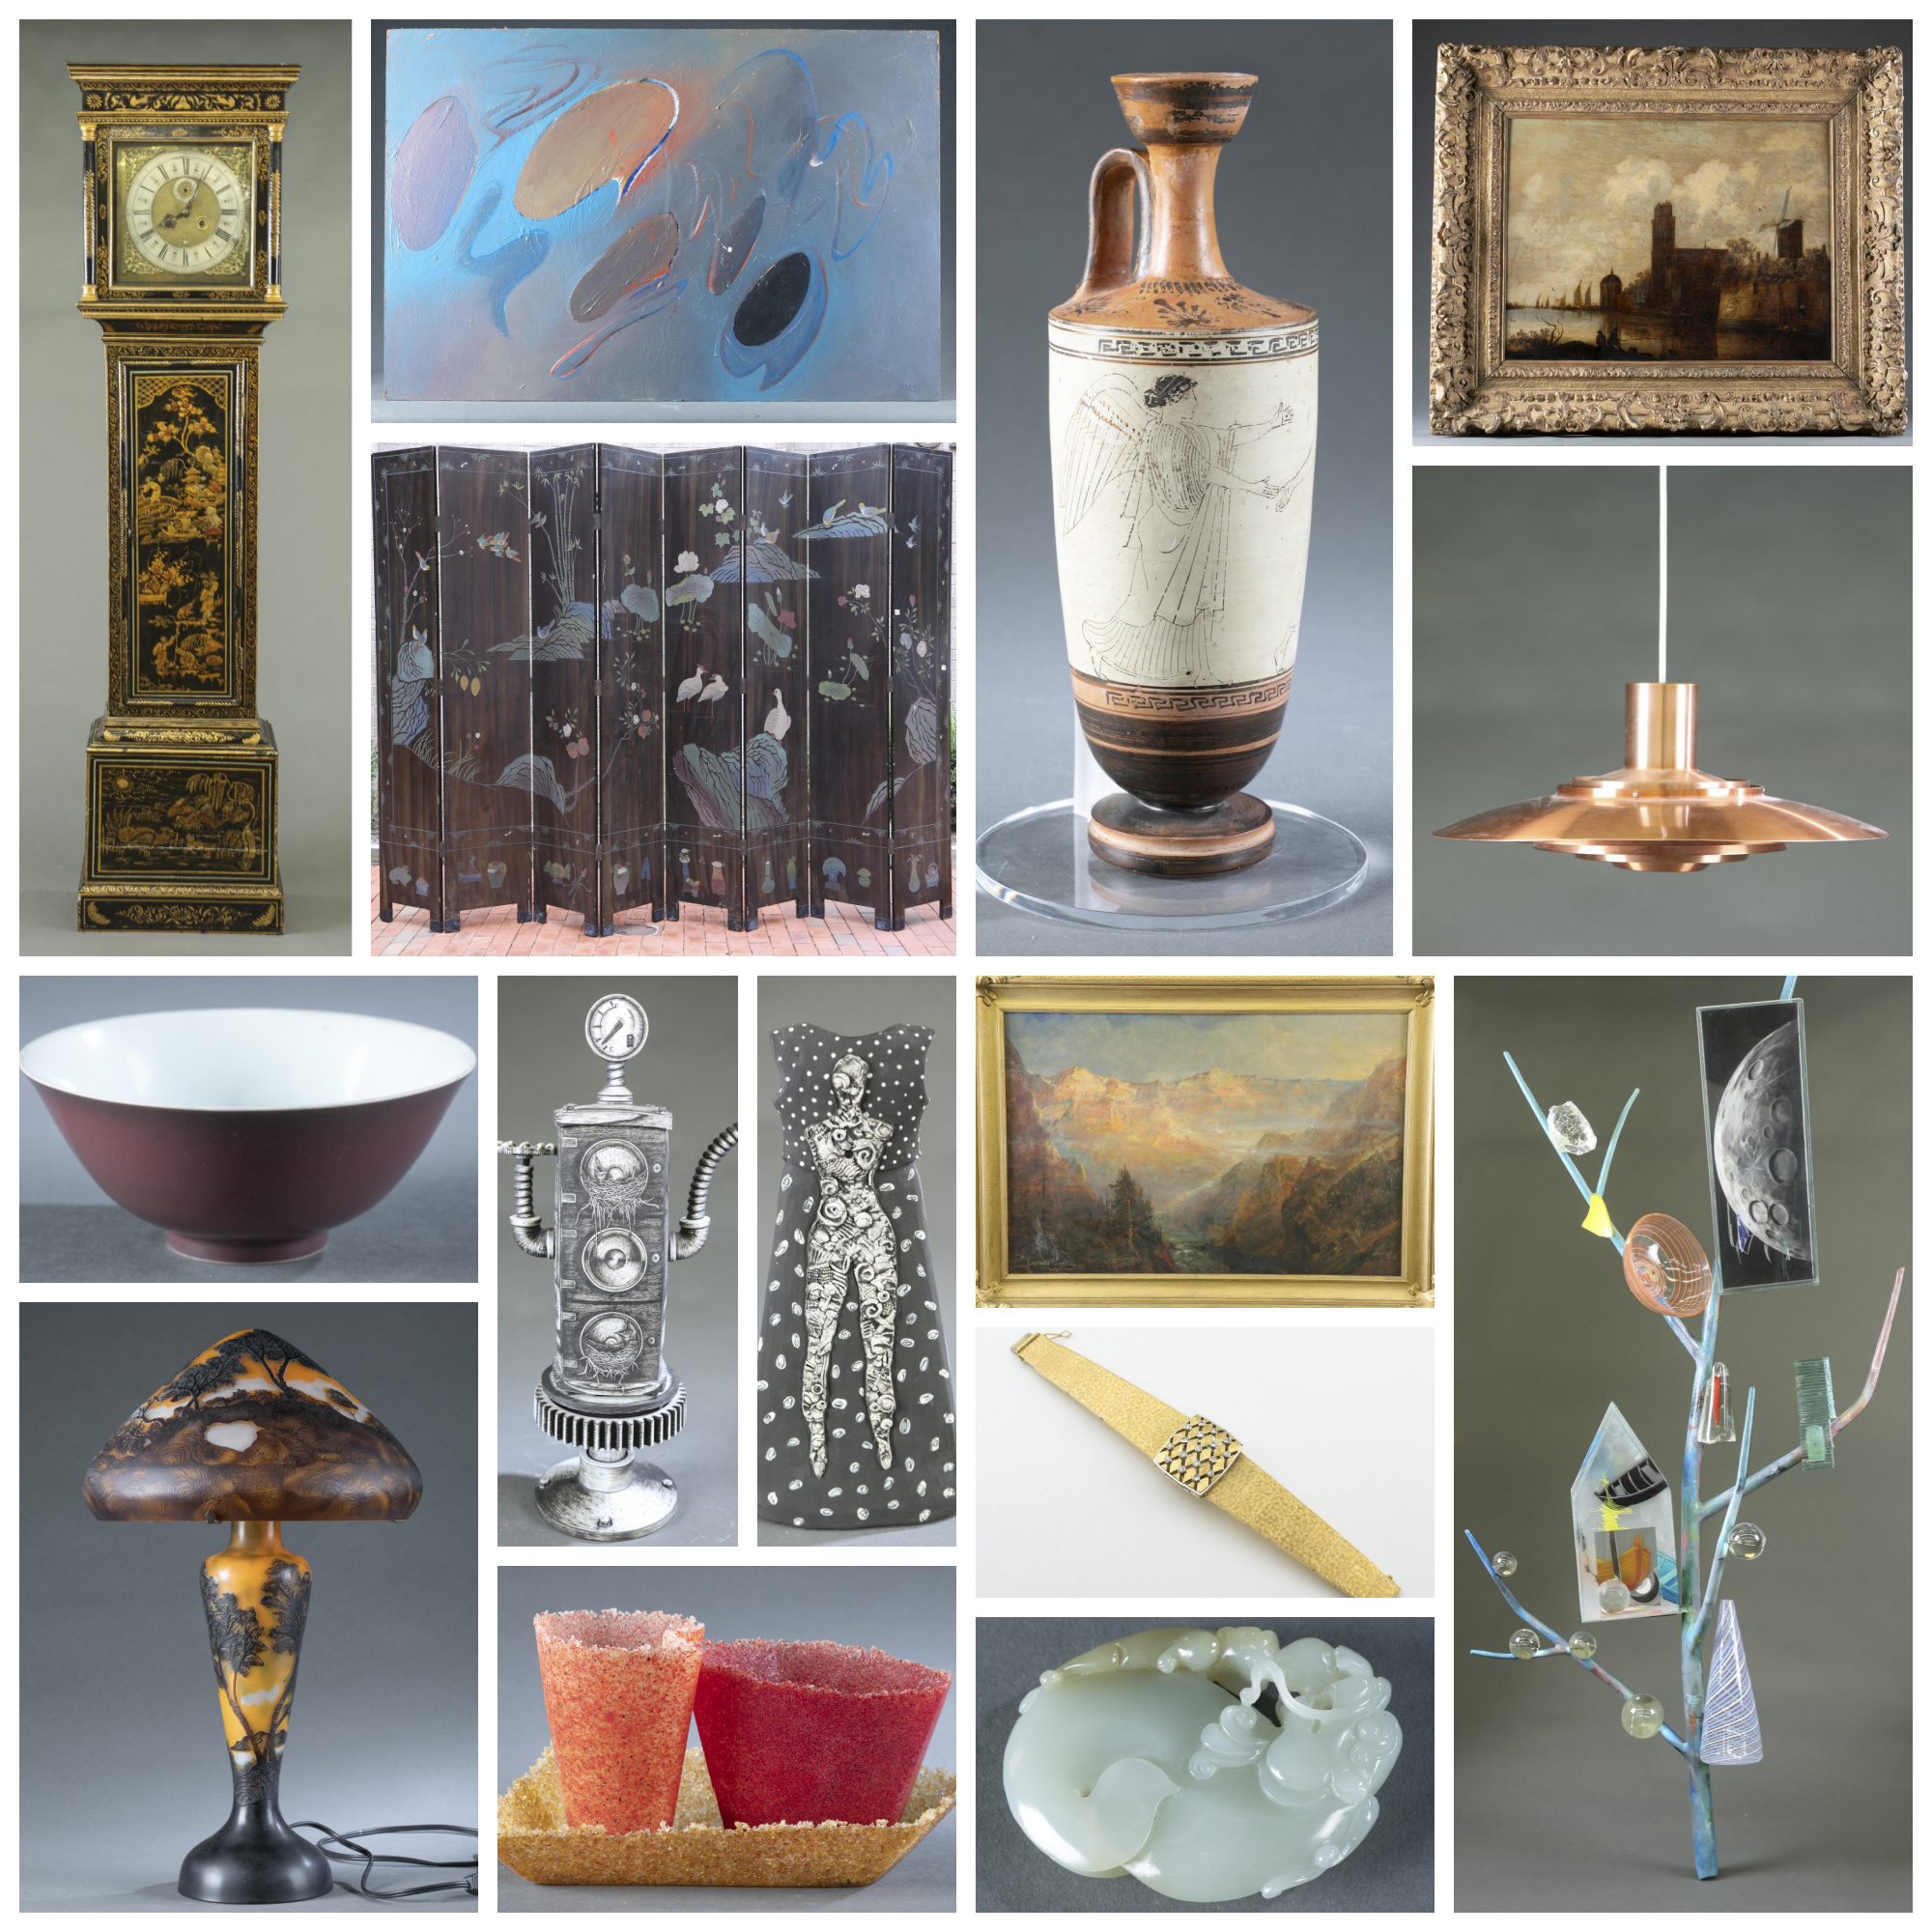 September 24th Fine and Decorative Arts Auction